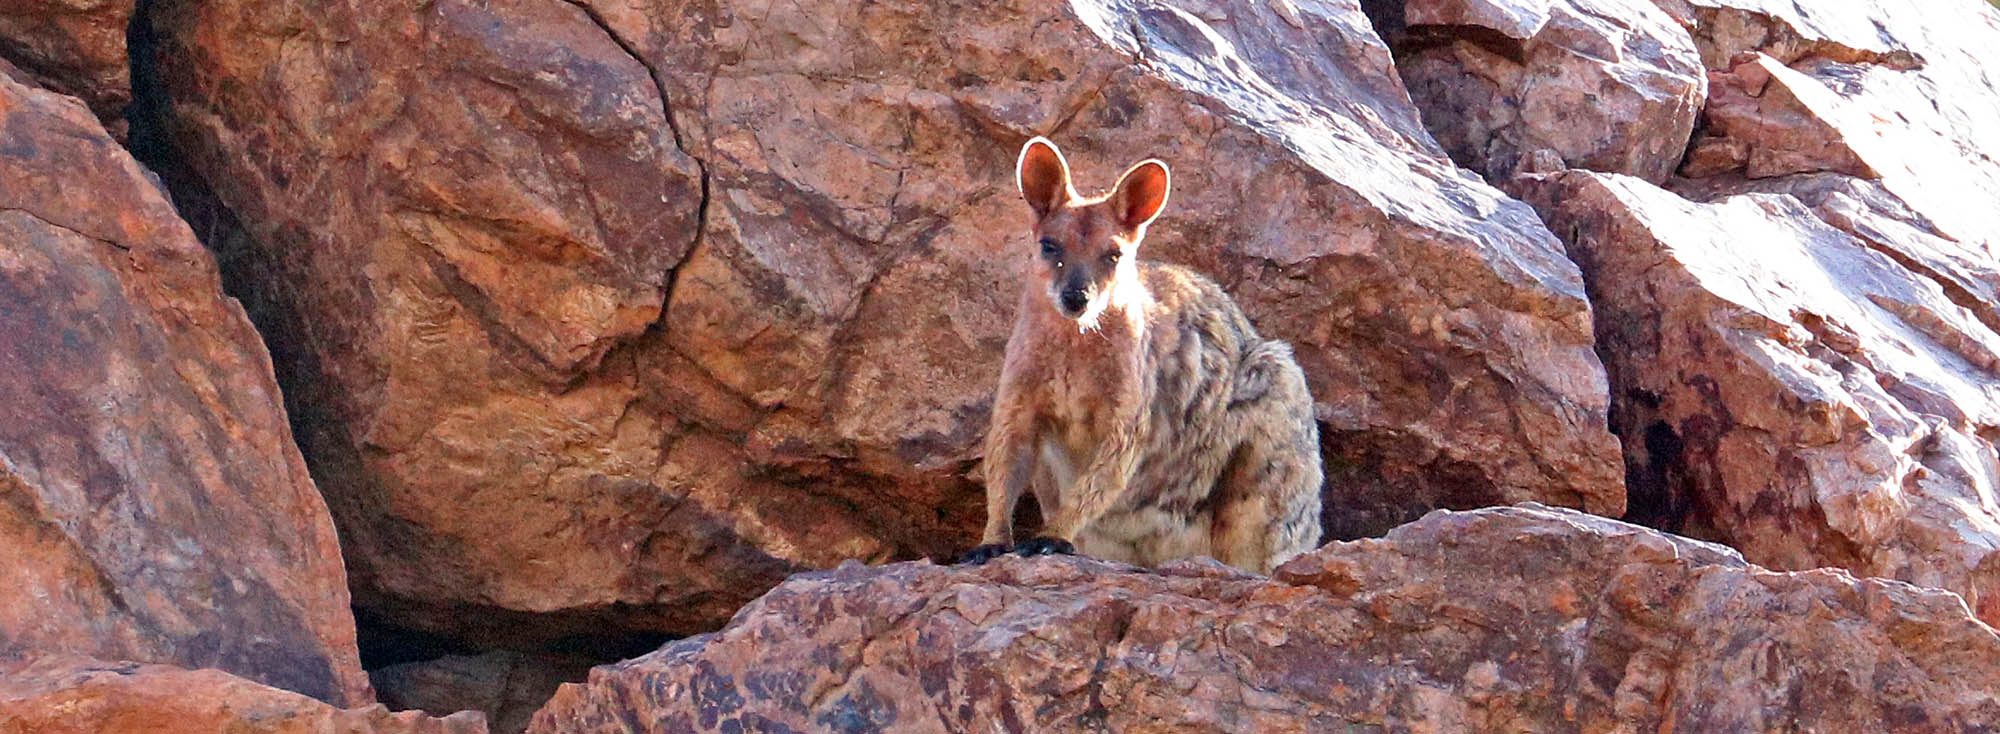 Purple-necked Rock Wallaby (image by Damon Ramsey)